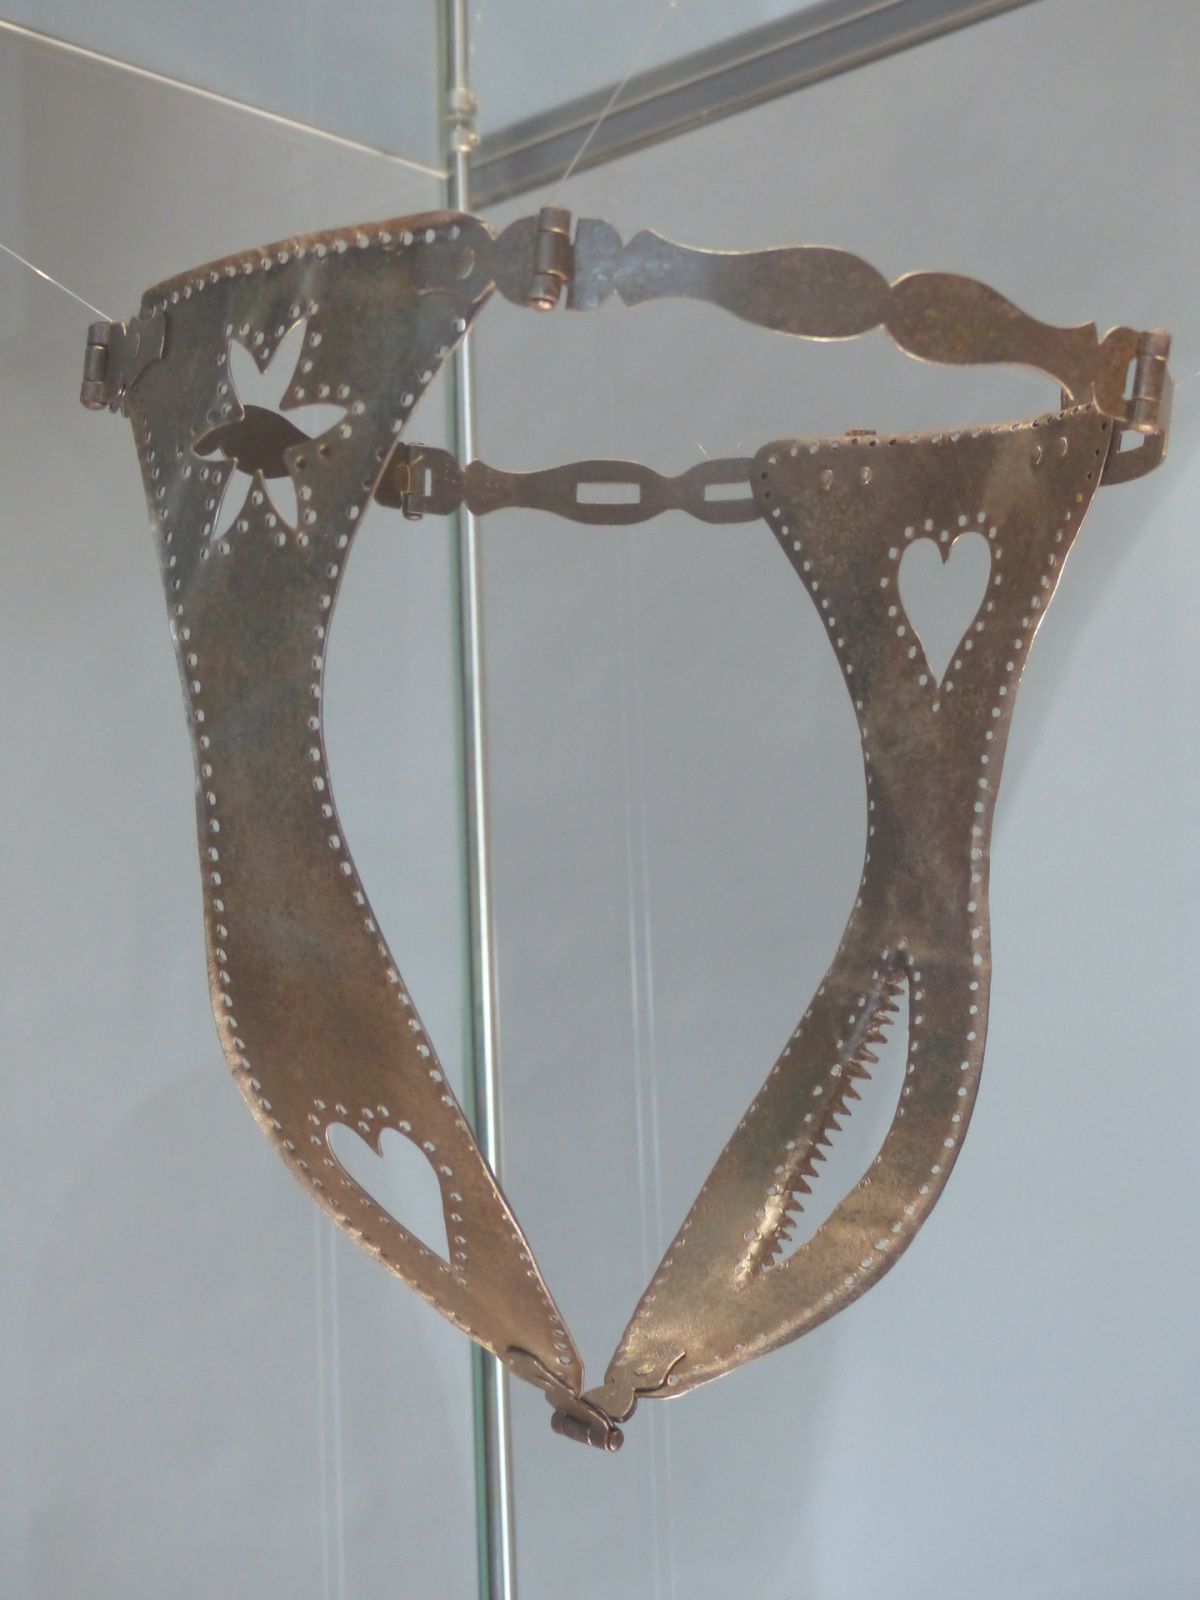 The Evolution of Male Chastity Belts in the 19th Century: A Fascinating Look into a Taboo Practice